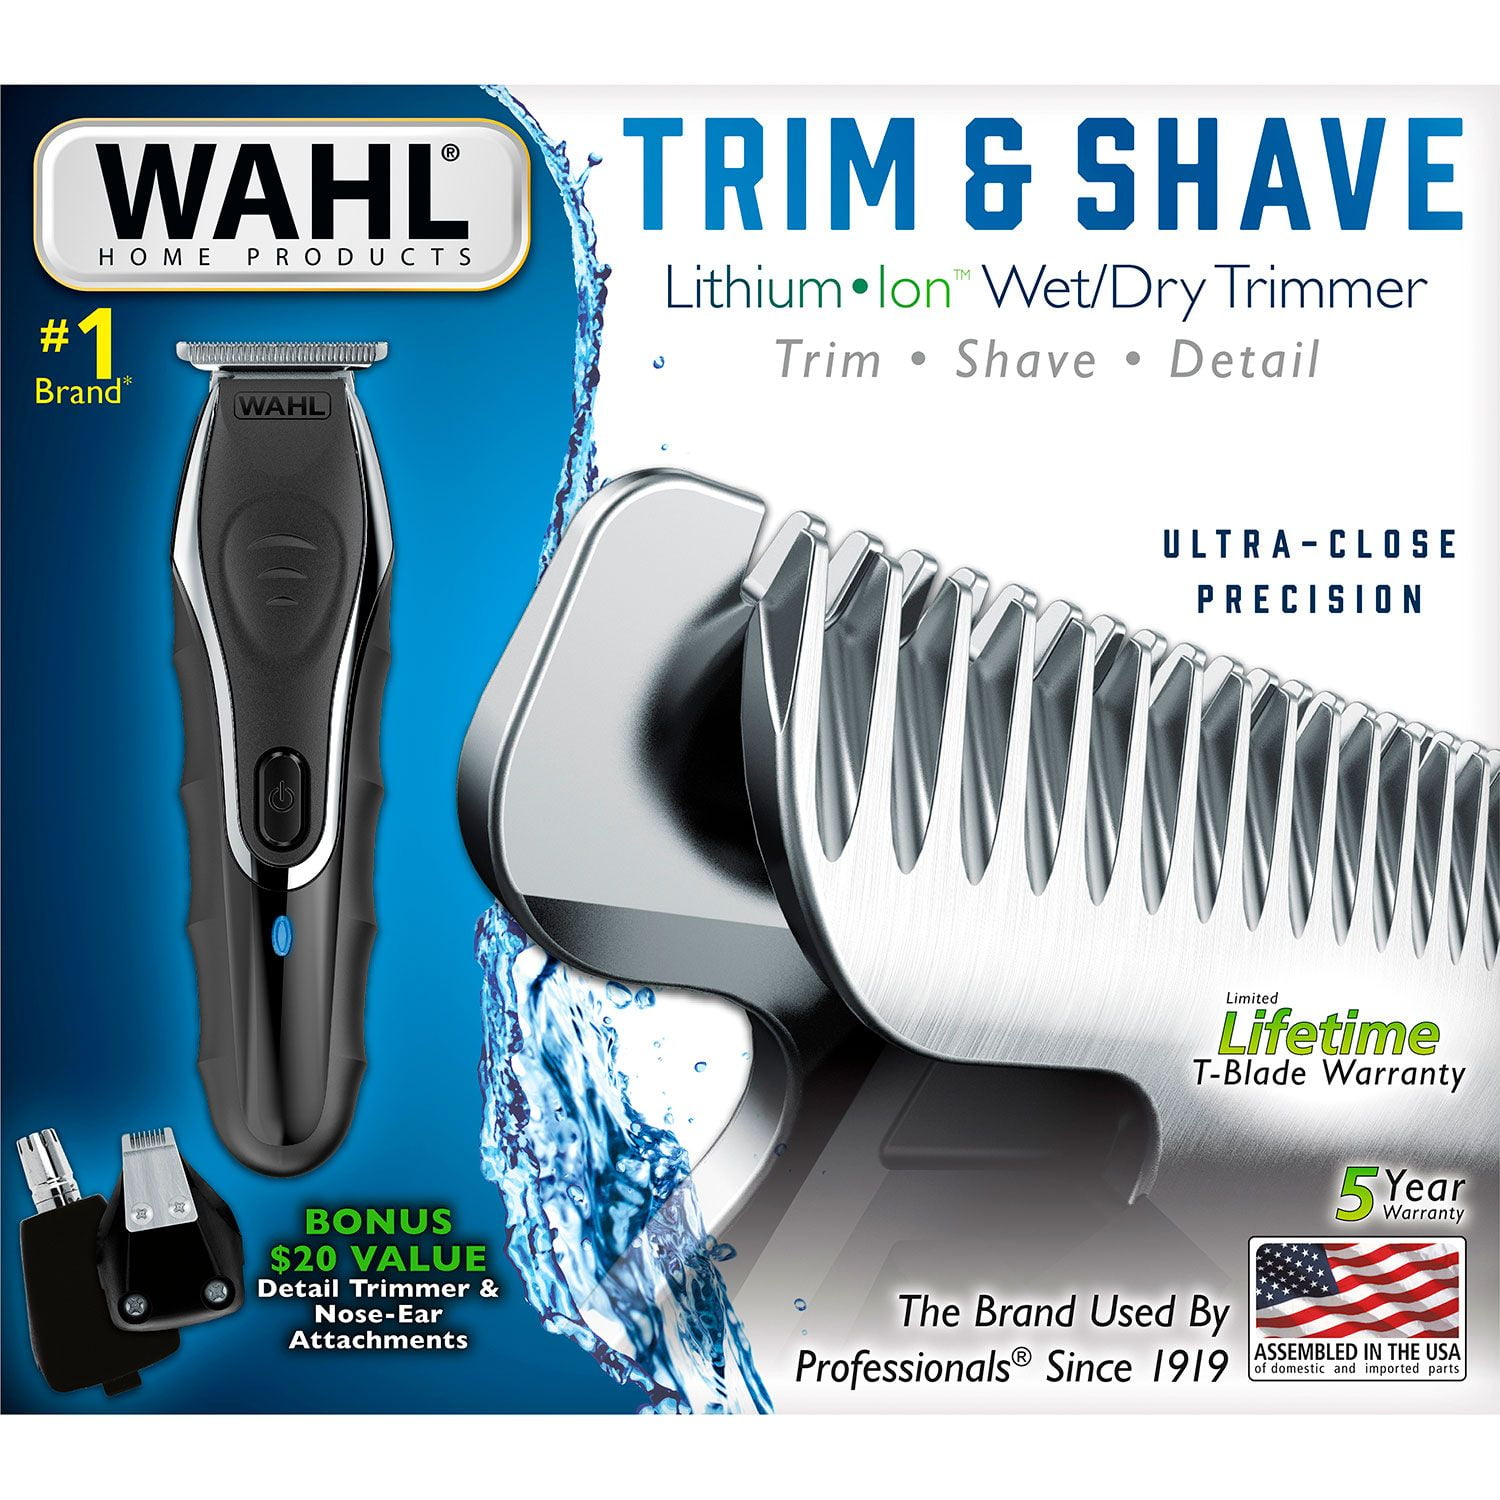 wahl trim and shave